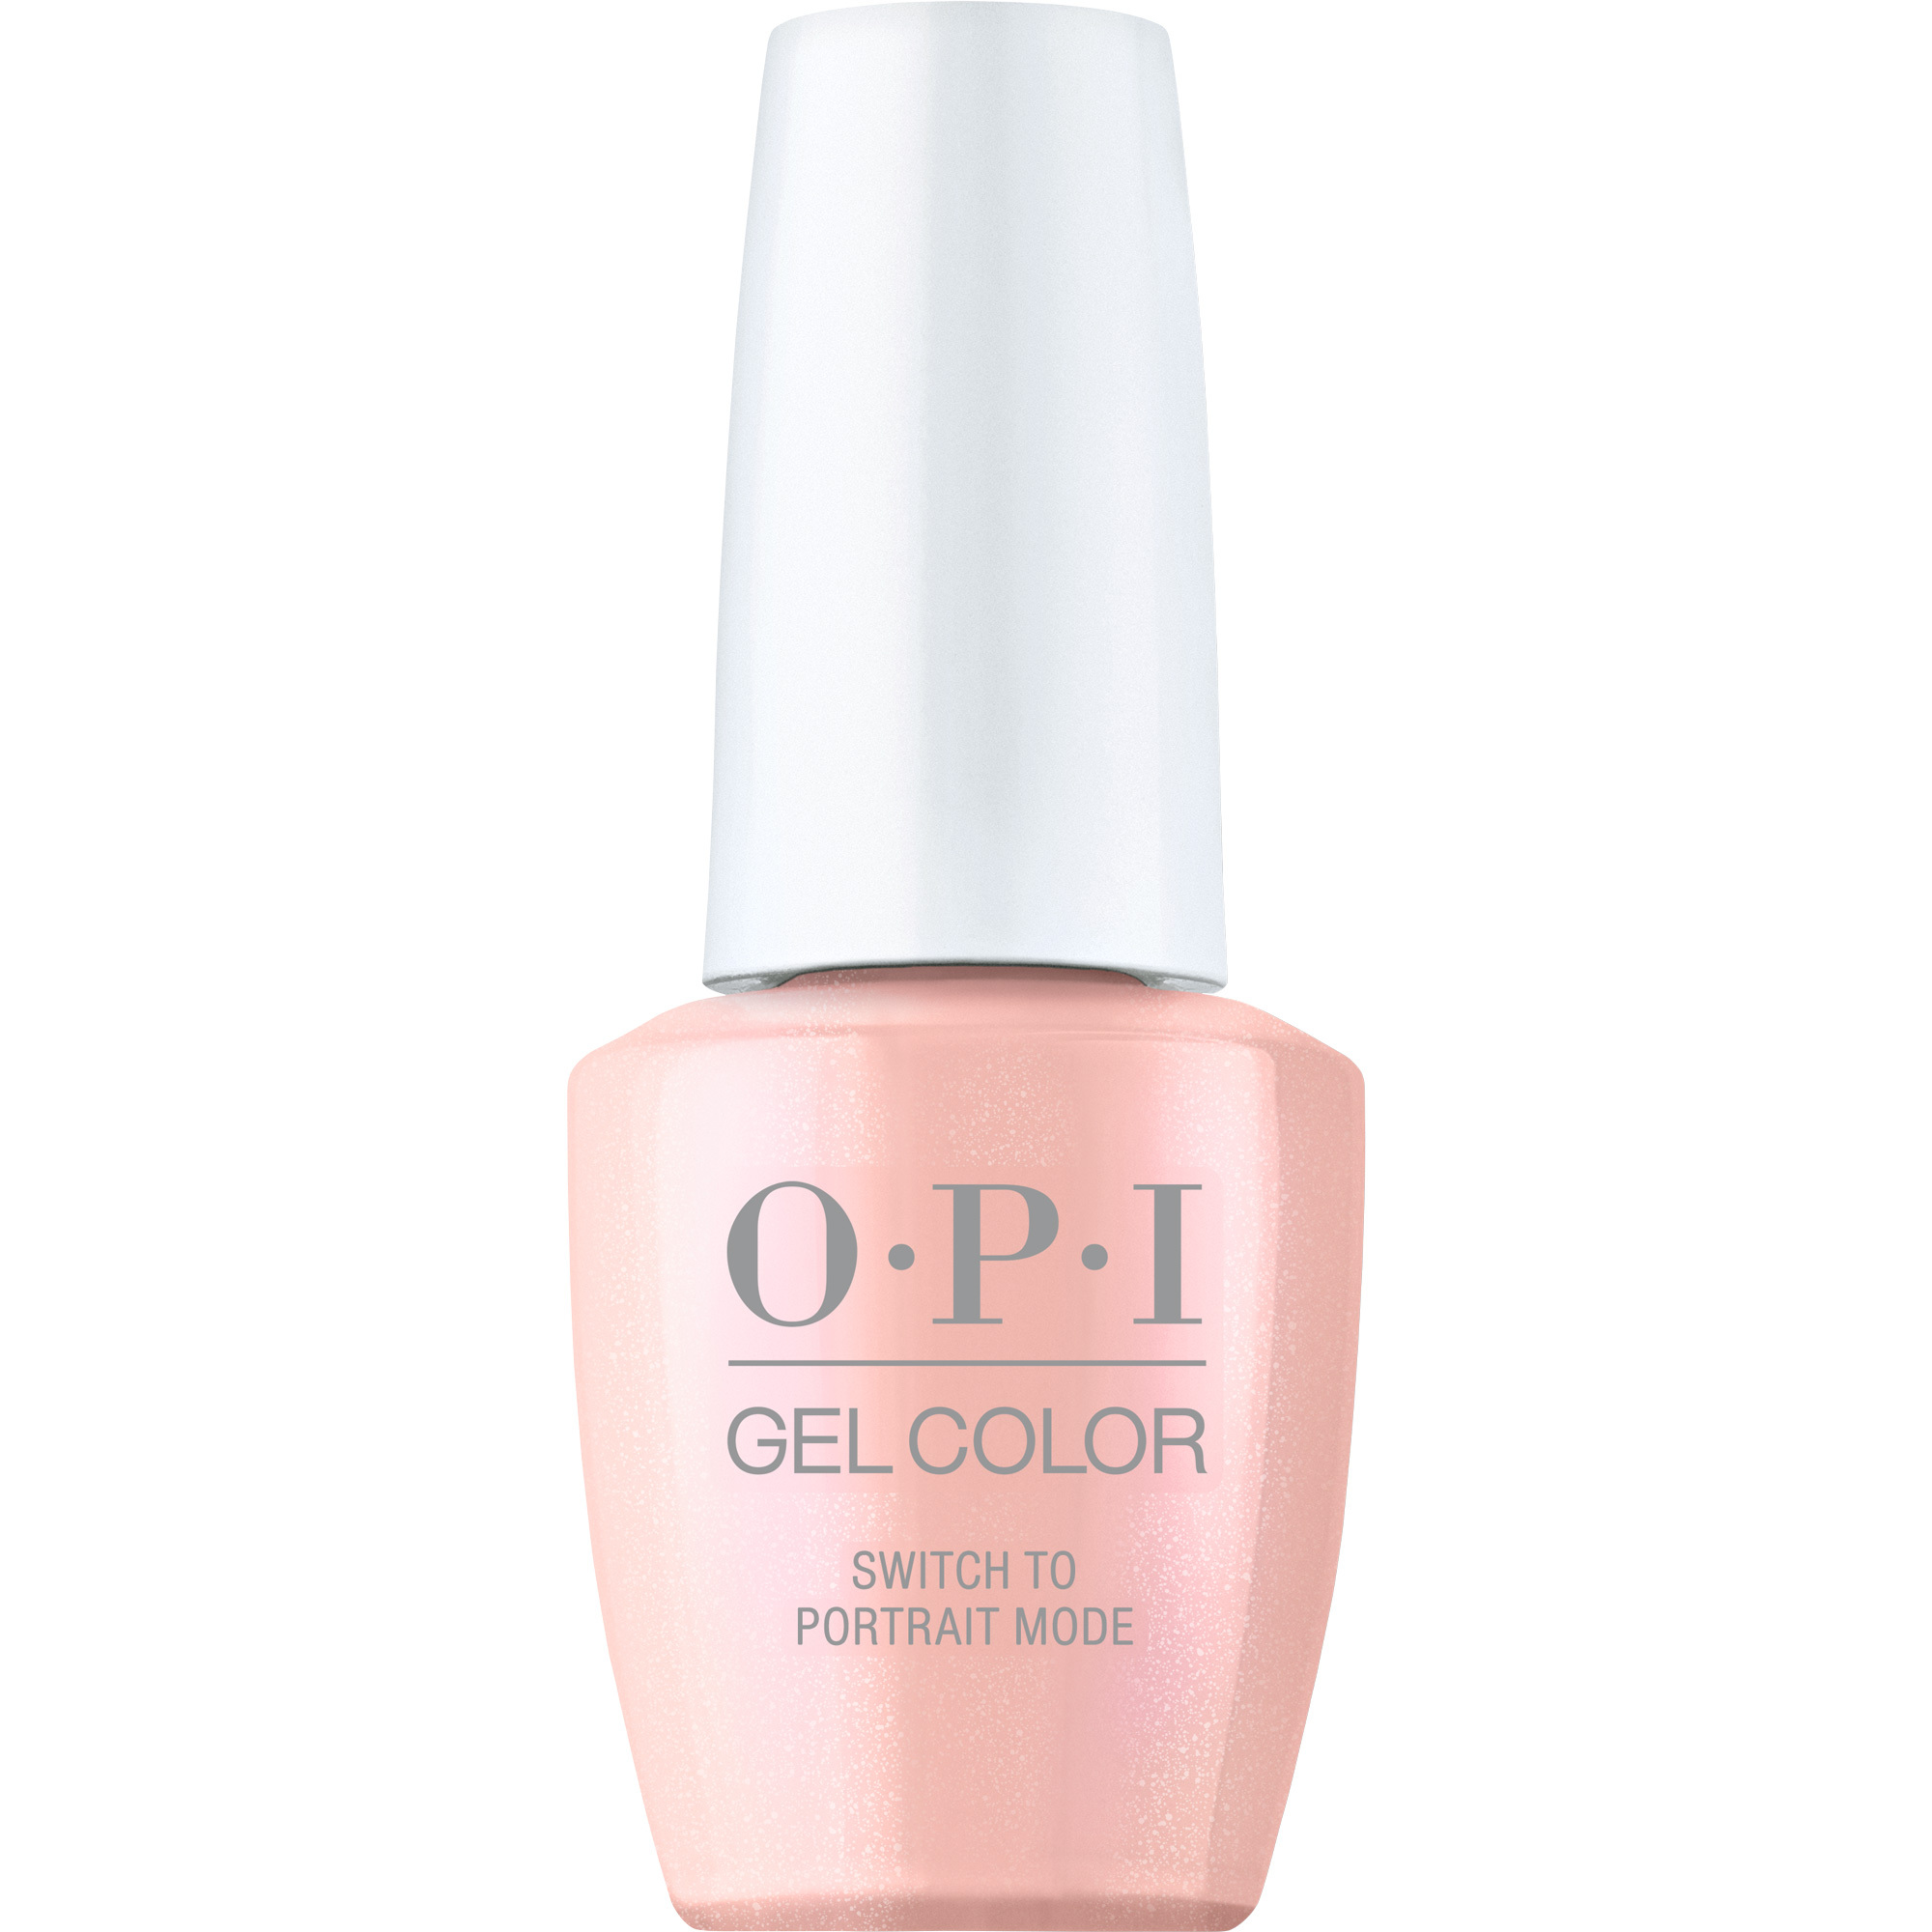 OPI Gel Color 360 - Switch to Portrait Mode